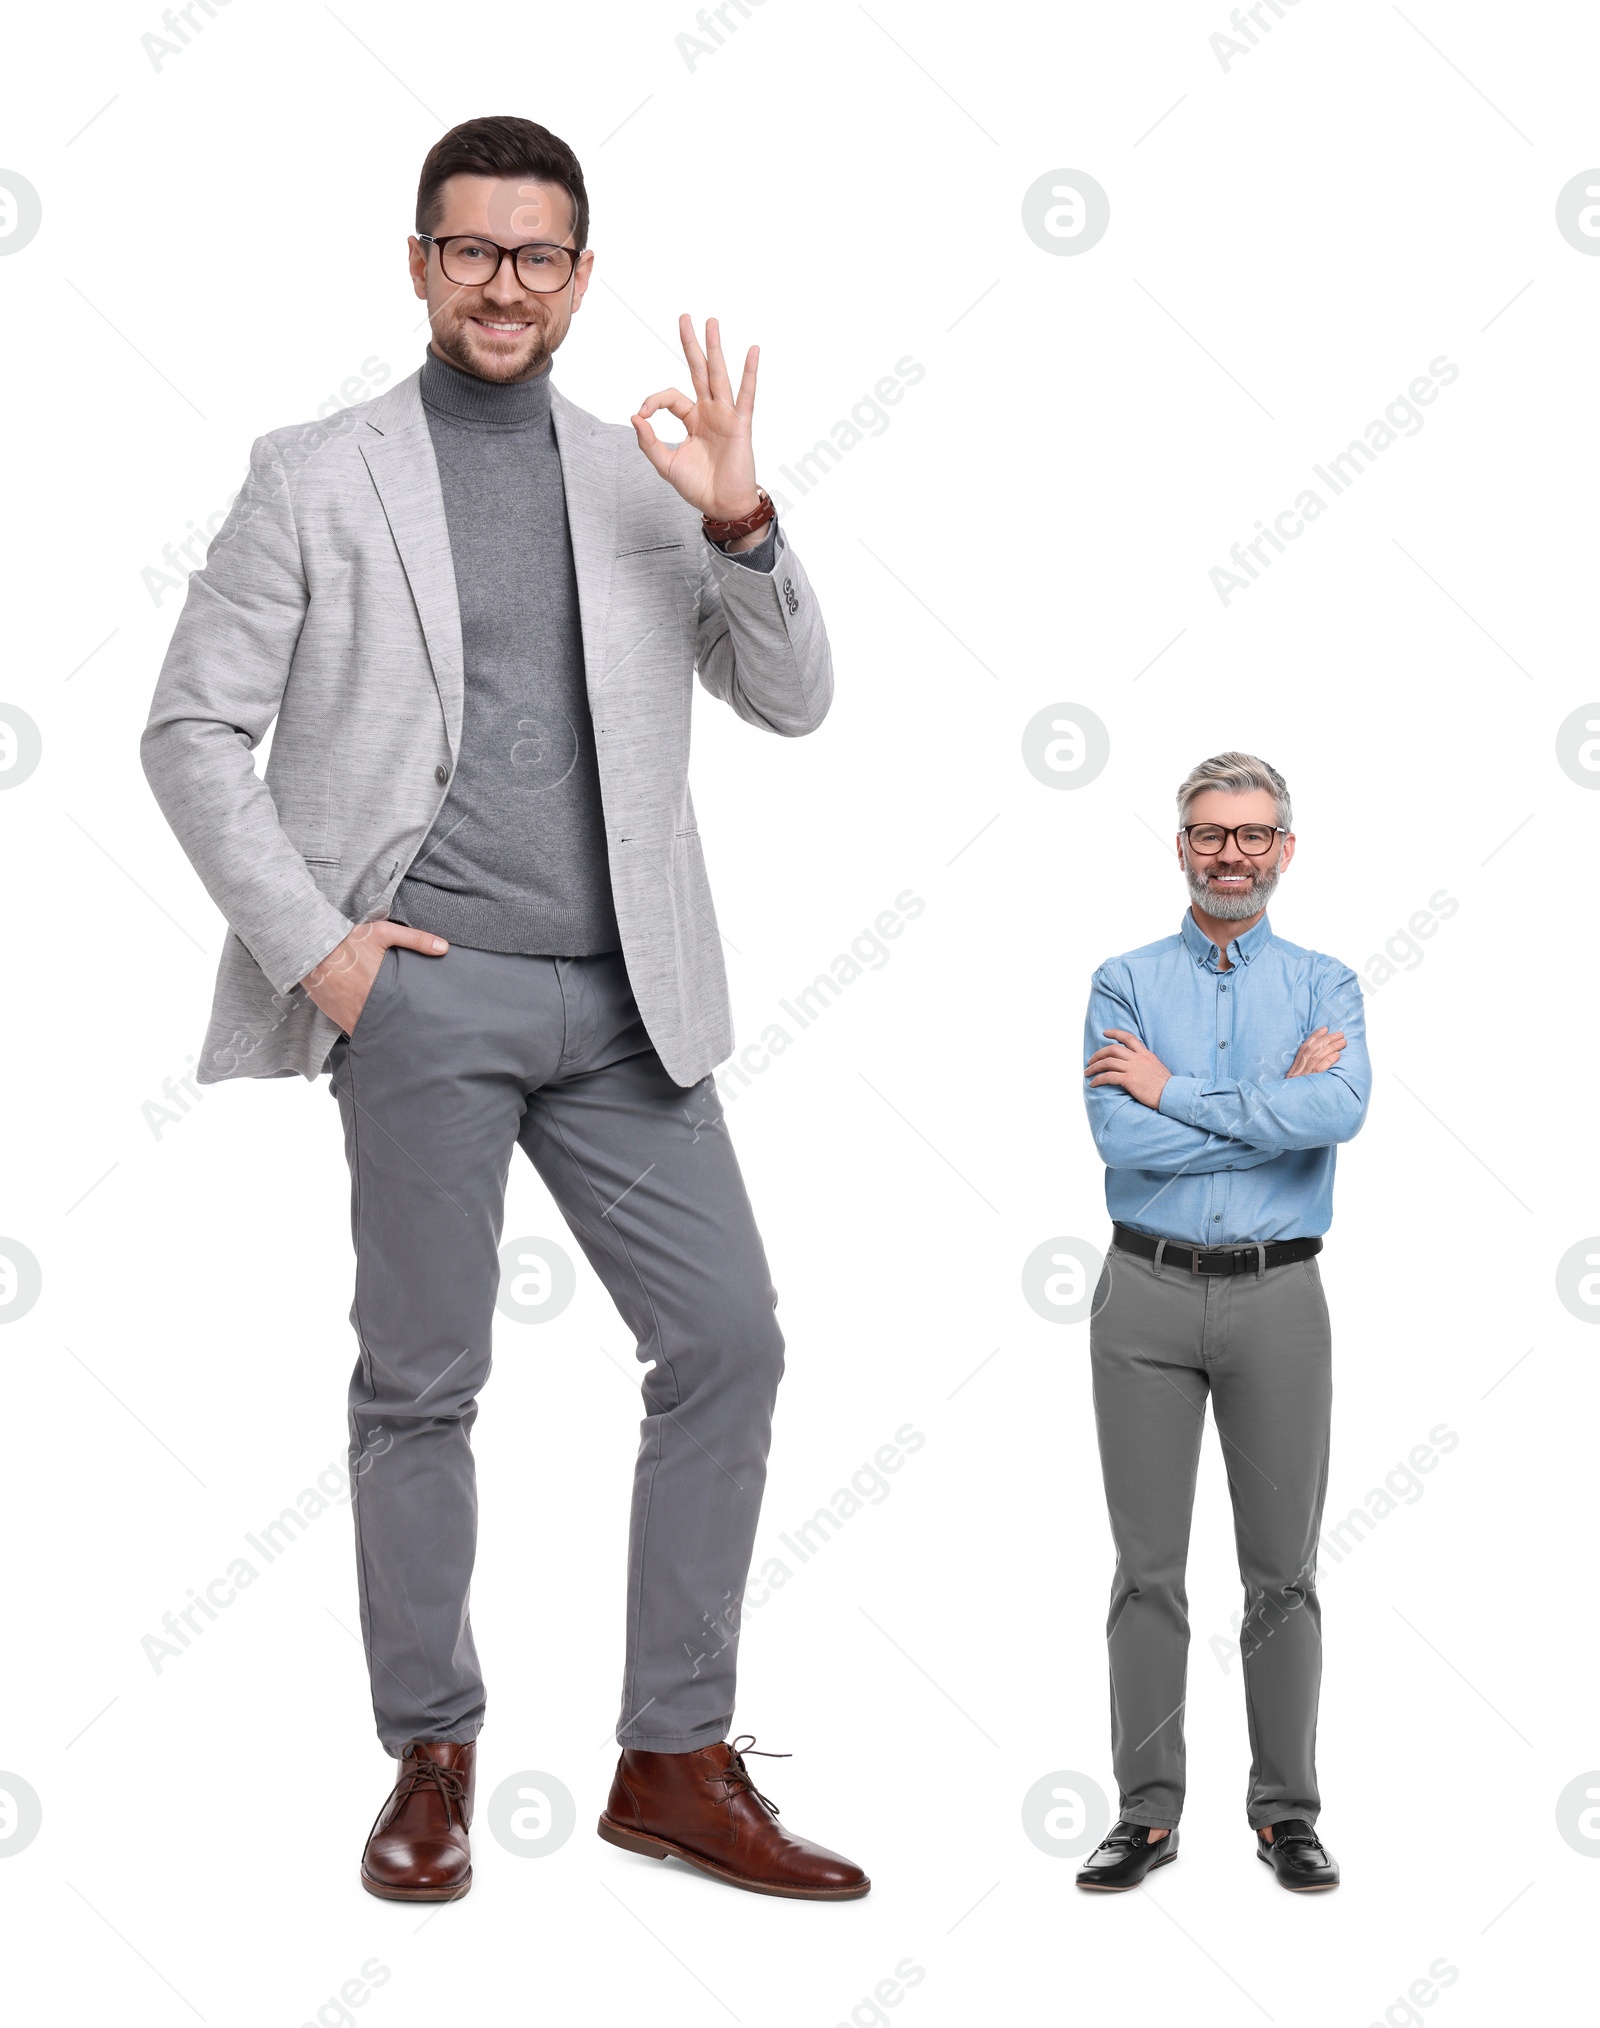 Image of Happy giant boss and small man on white background